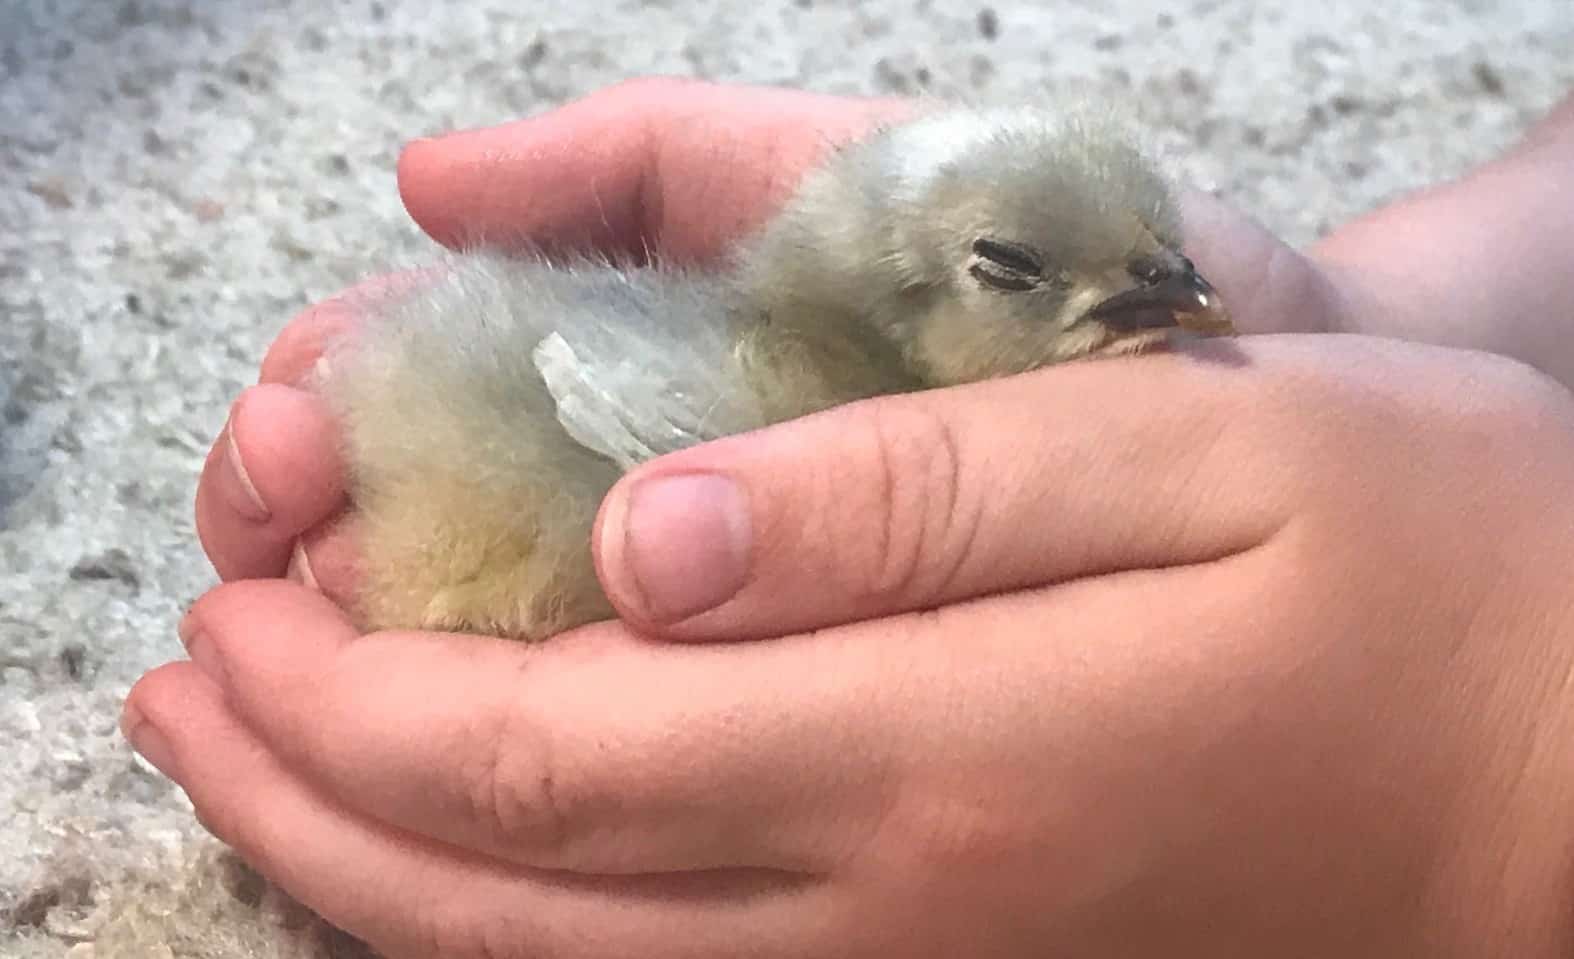 a lavender orpington chick sleeps in a man's hands